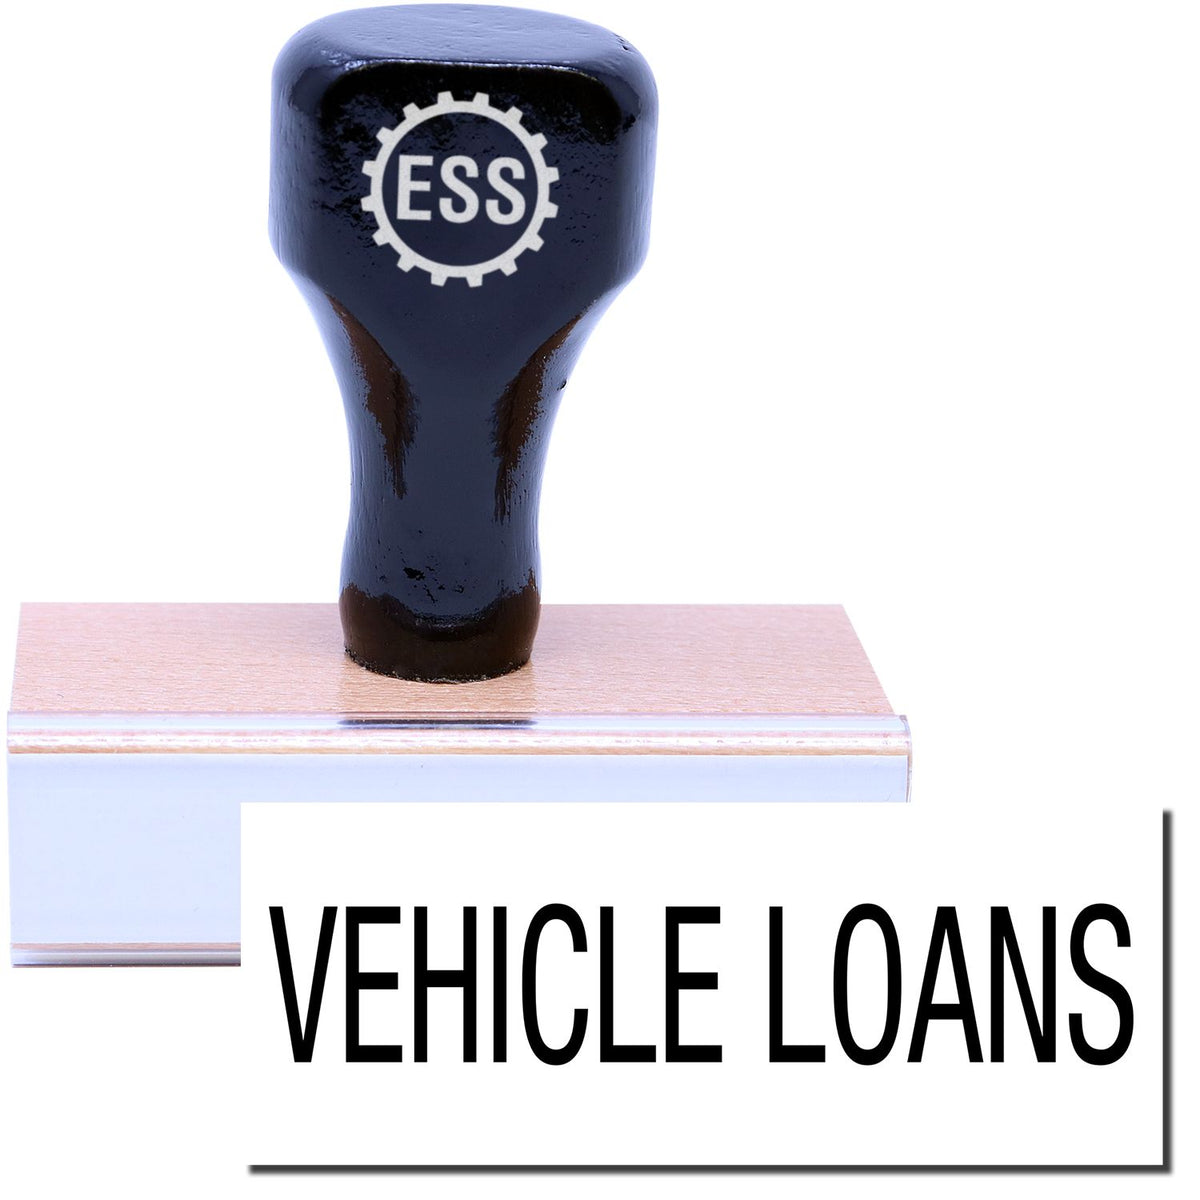 A stock office rubber stamp with a stamped image showing how the text &quot;VEHICLE LOANS&quot; is displayed after stamping.